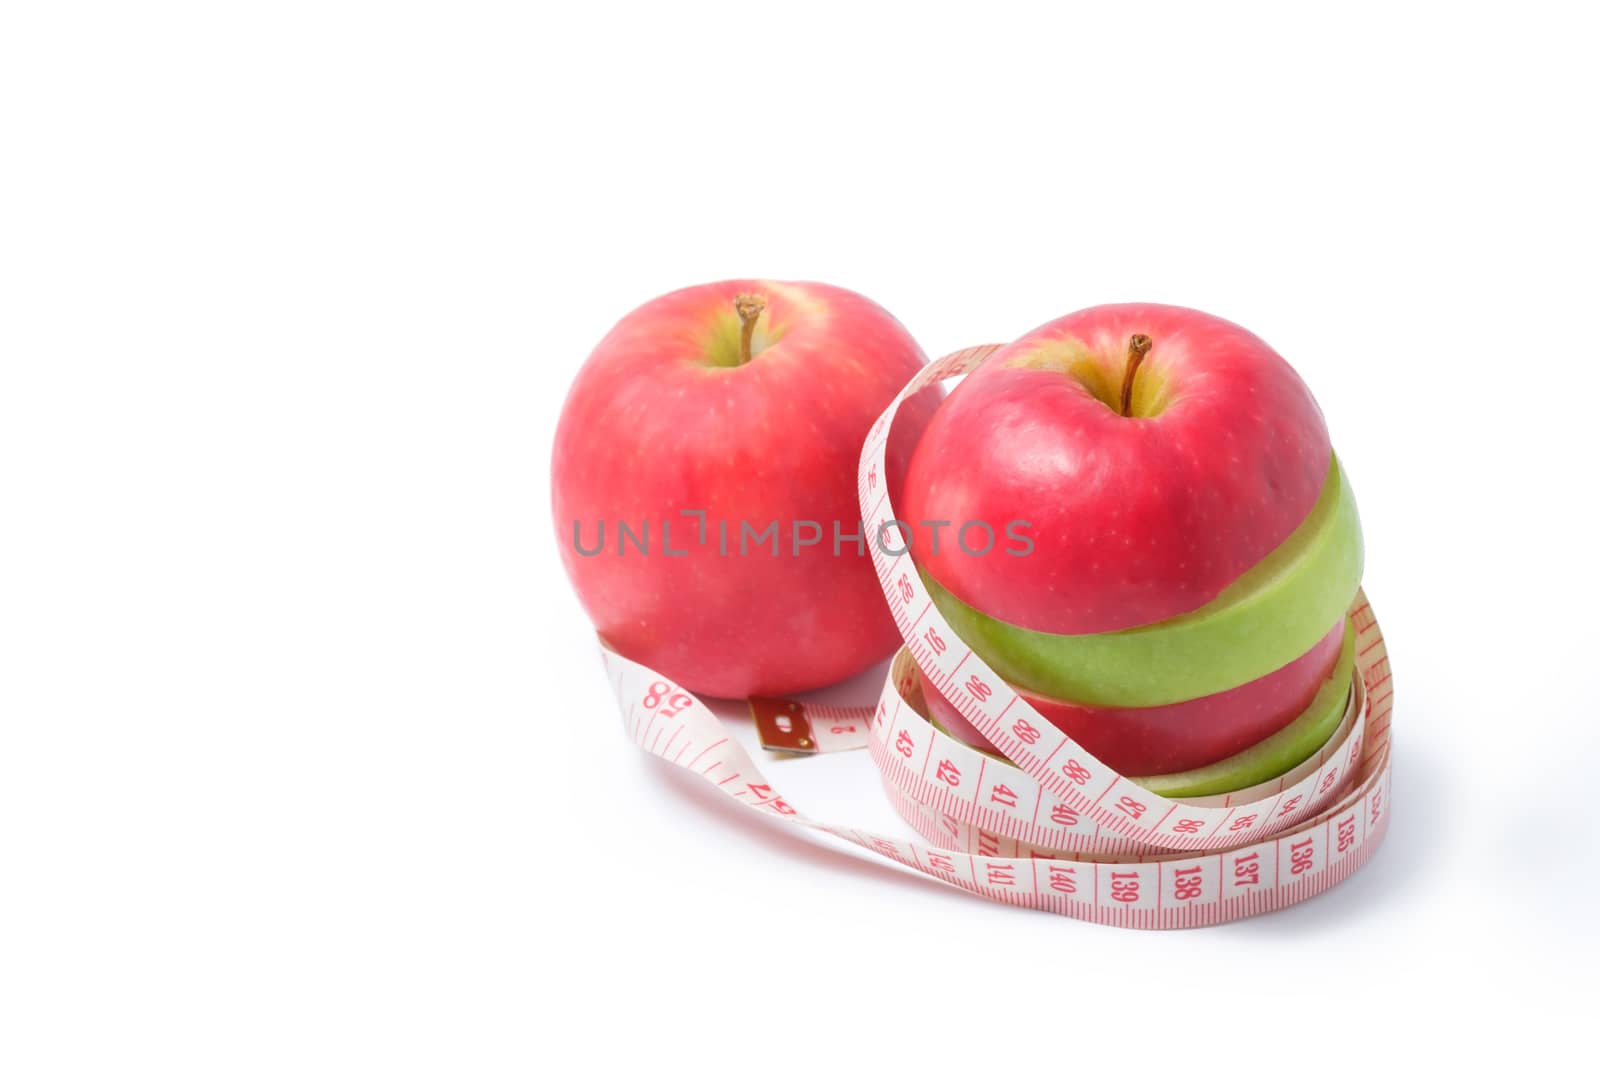 slice red and green apples with waist measure on white background.space for adding your text.
